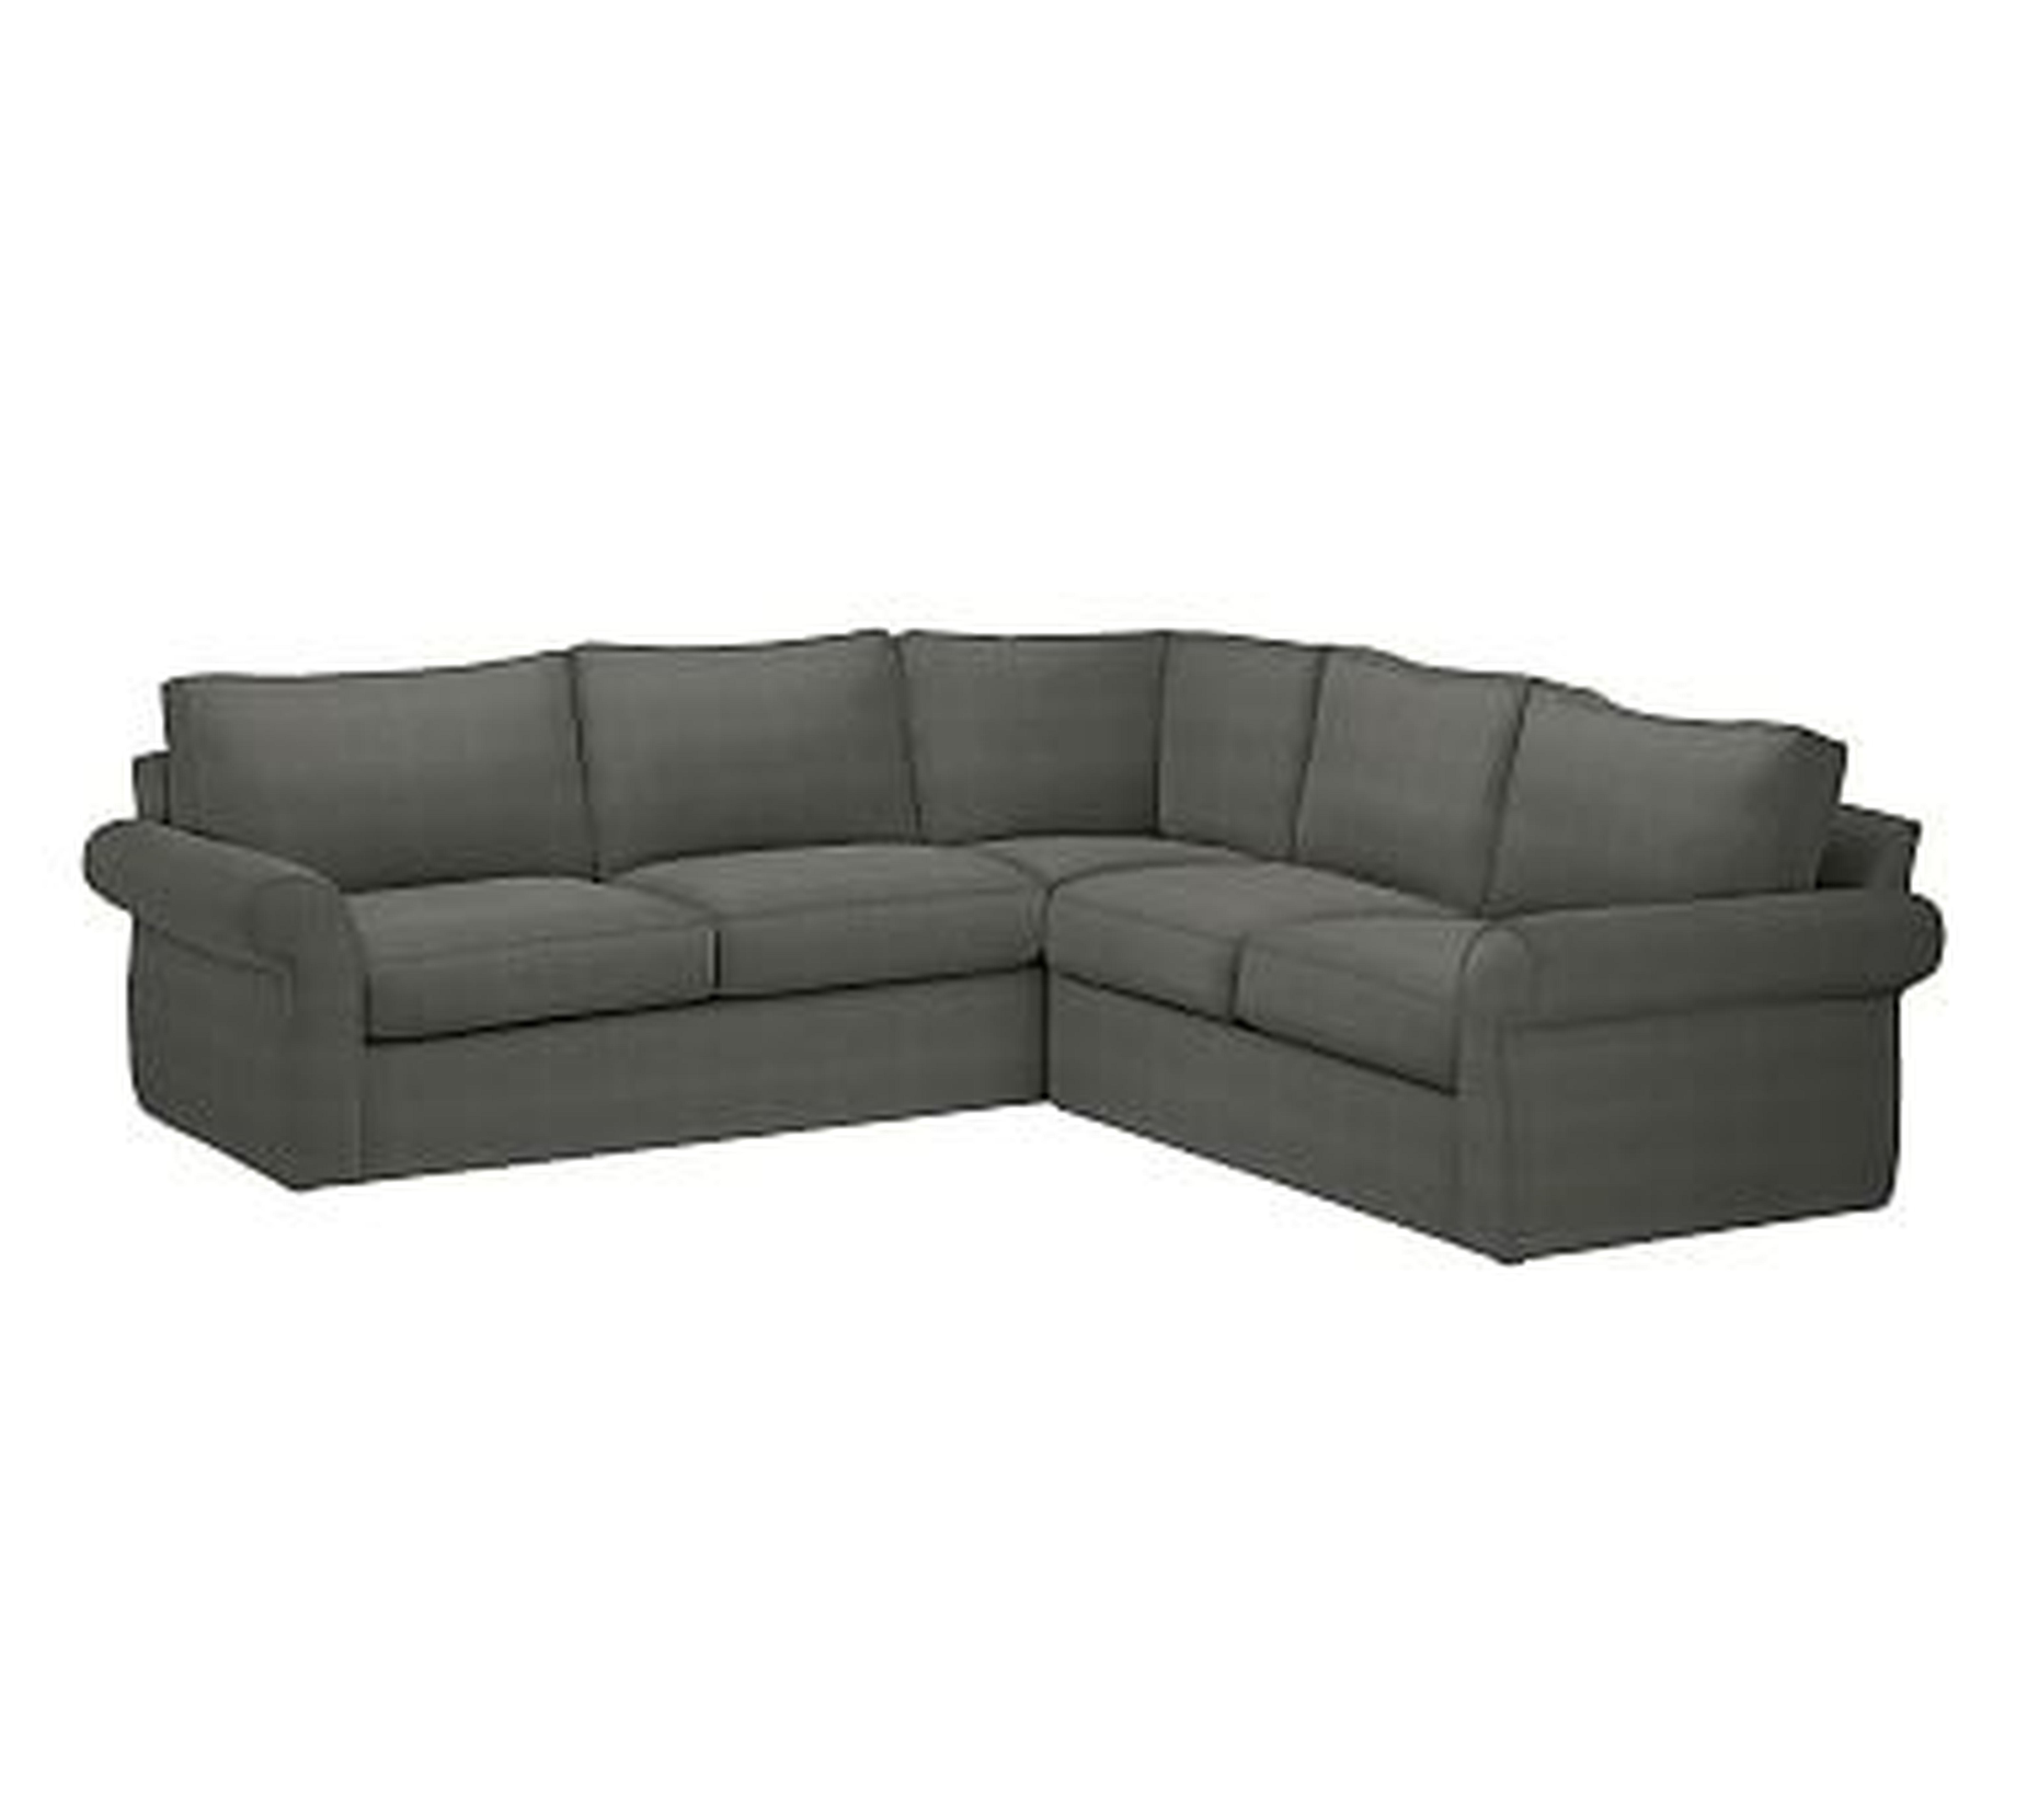 Pearce Roll Arm Slipcovered 2-Piece L-Shaped Sectional, Down Blend Wrapped Cushions, Performance Tweed Slate - Pottery Barn